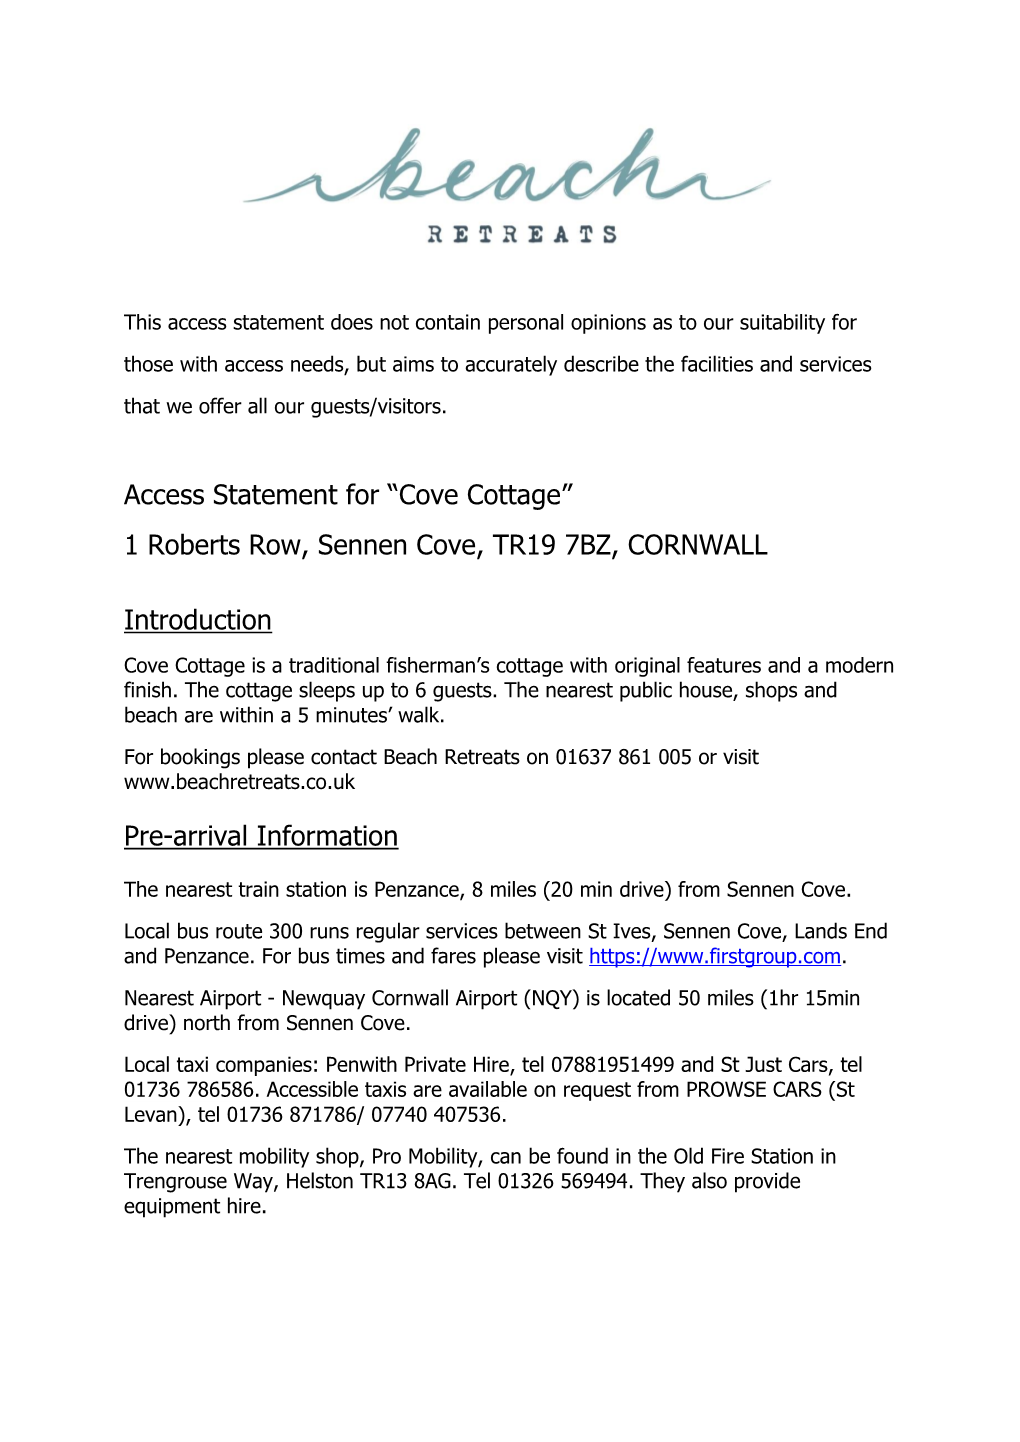 Access Statement for “Cove Cottage” 1 Roberts Row, Sennen Cove, TR19 7BZ, CORNWALL